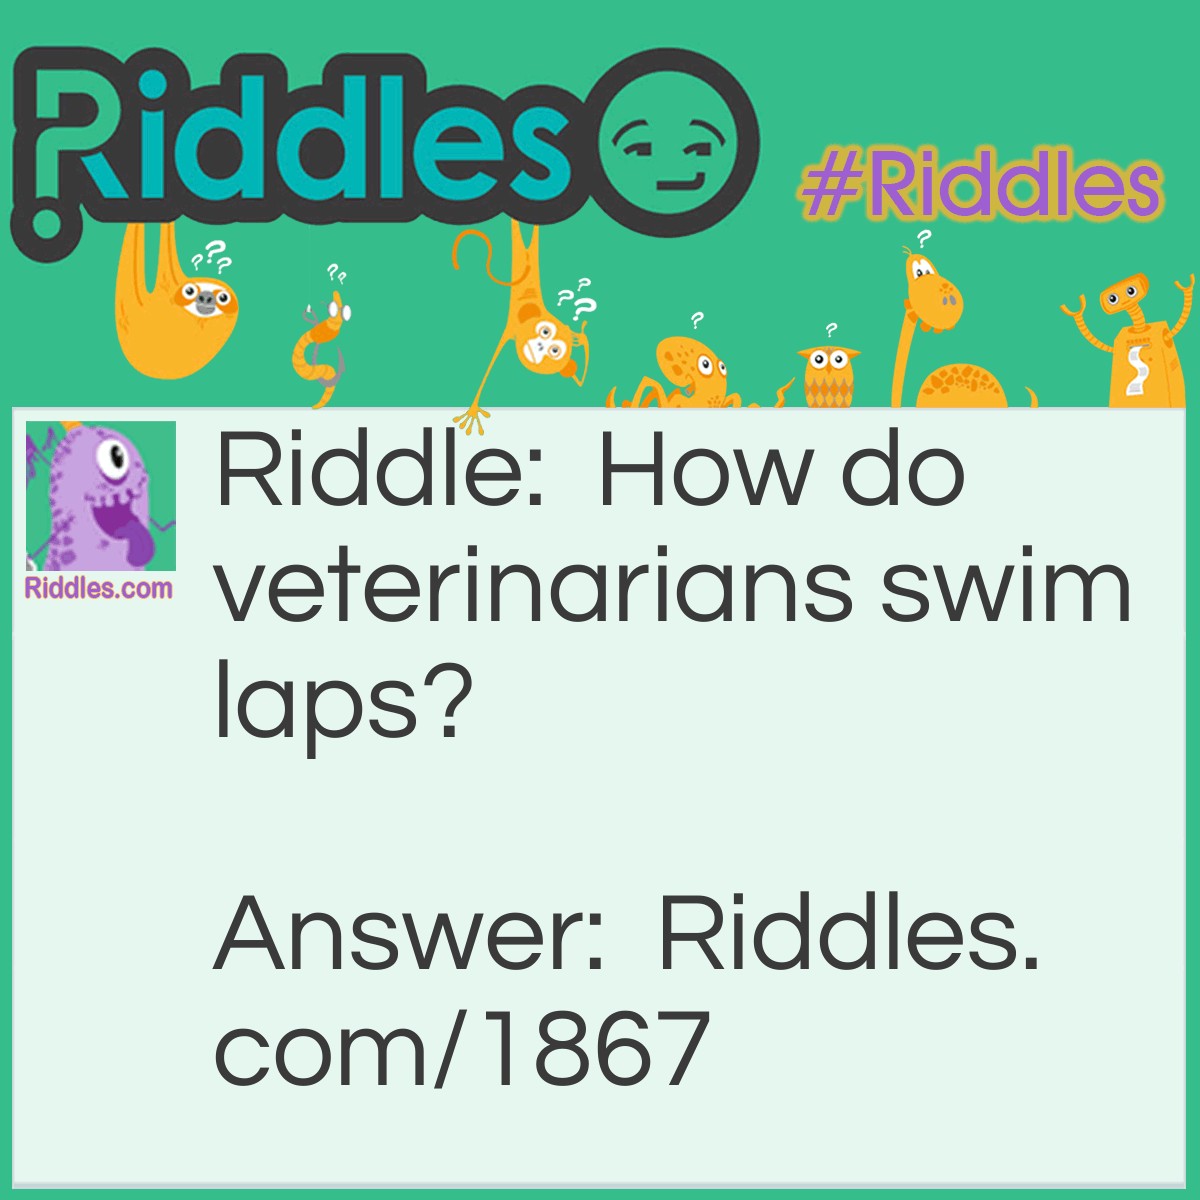 Riddle: How do veterinarians swim laps? Answer: They dog paddle.